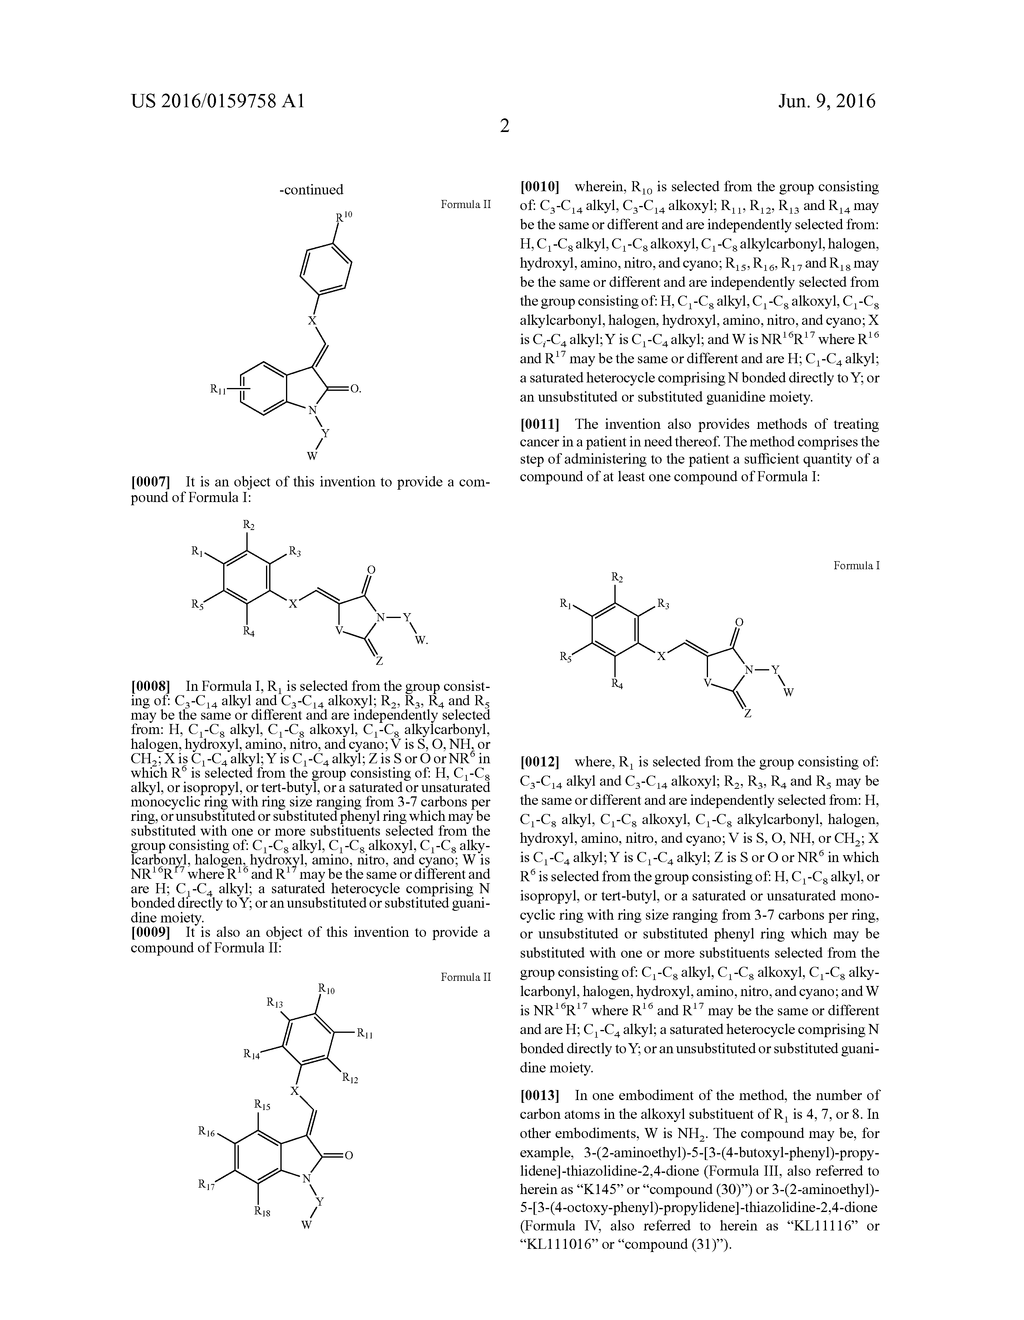 3-(2-AMINO-ETHYL)-ALKYLIDENE)-THIAZOLIDINE-2,4-DIONE AND     1-(2-AMINO-ETHYL)-ALKYLIDENE-1,3-DIHYDRO-INDOL-2-ONE DERIVATIVES AS     SELECTIVE SPHINGOSINE KINASE 2 INHIBITORS - diagram, schematic, and image 17